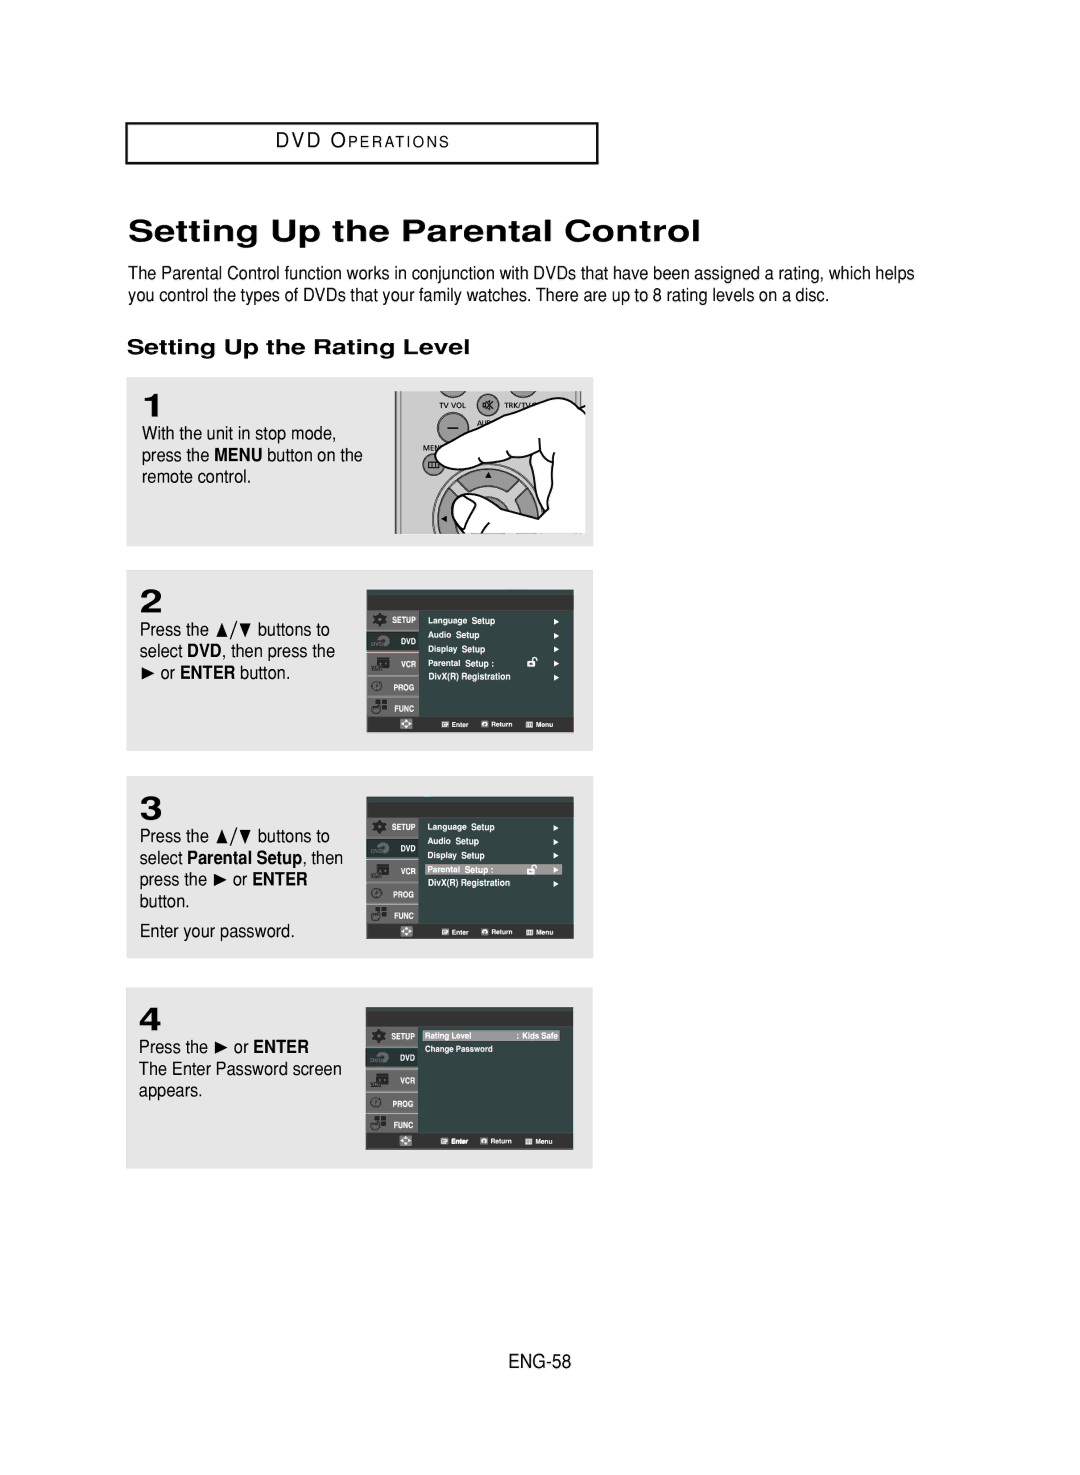 Samsung DVD-V9800 instruction manual Setting Up the Parental Control, Setting Up the Rating Level, ENG-58 